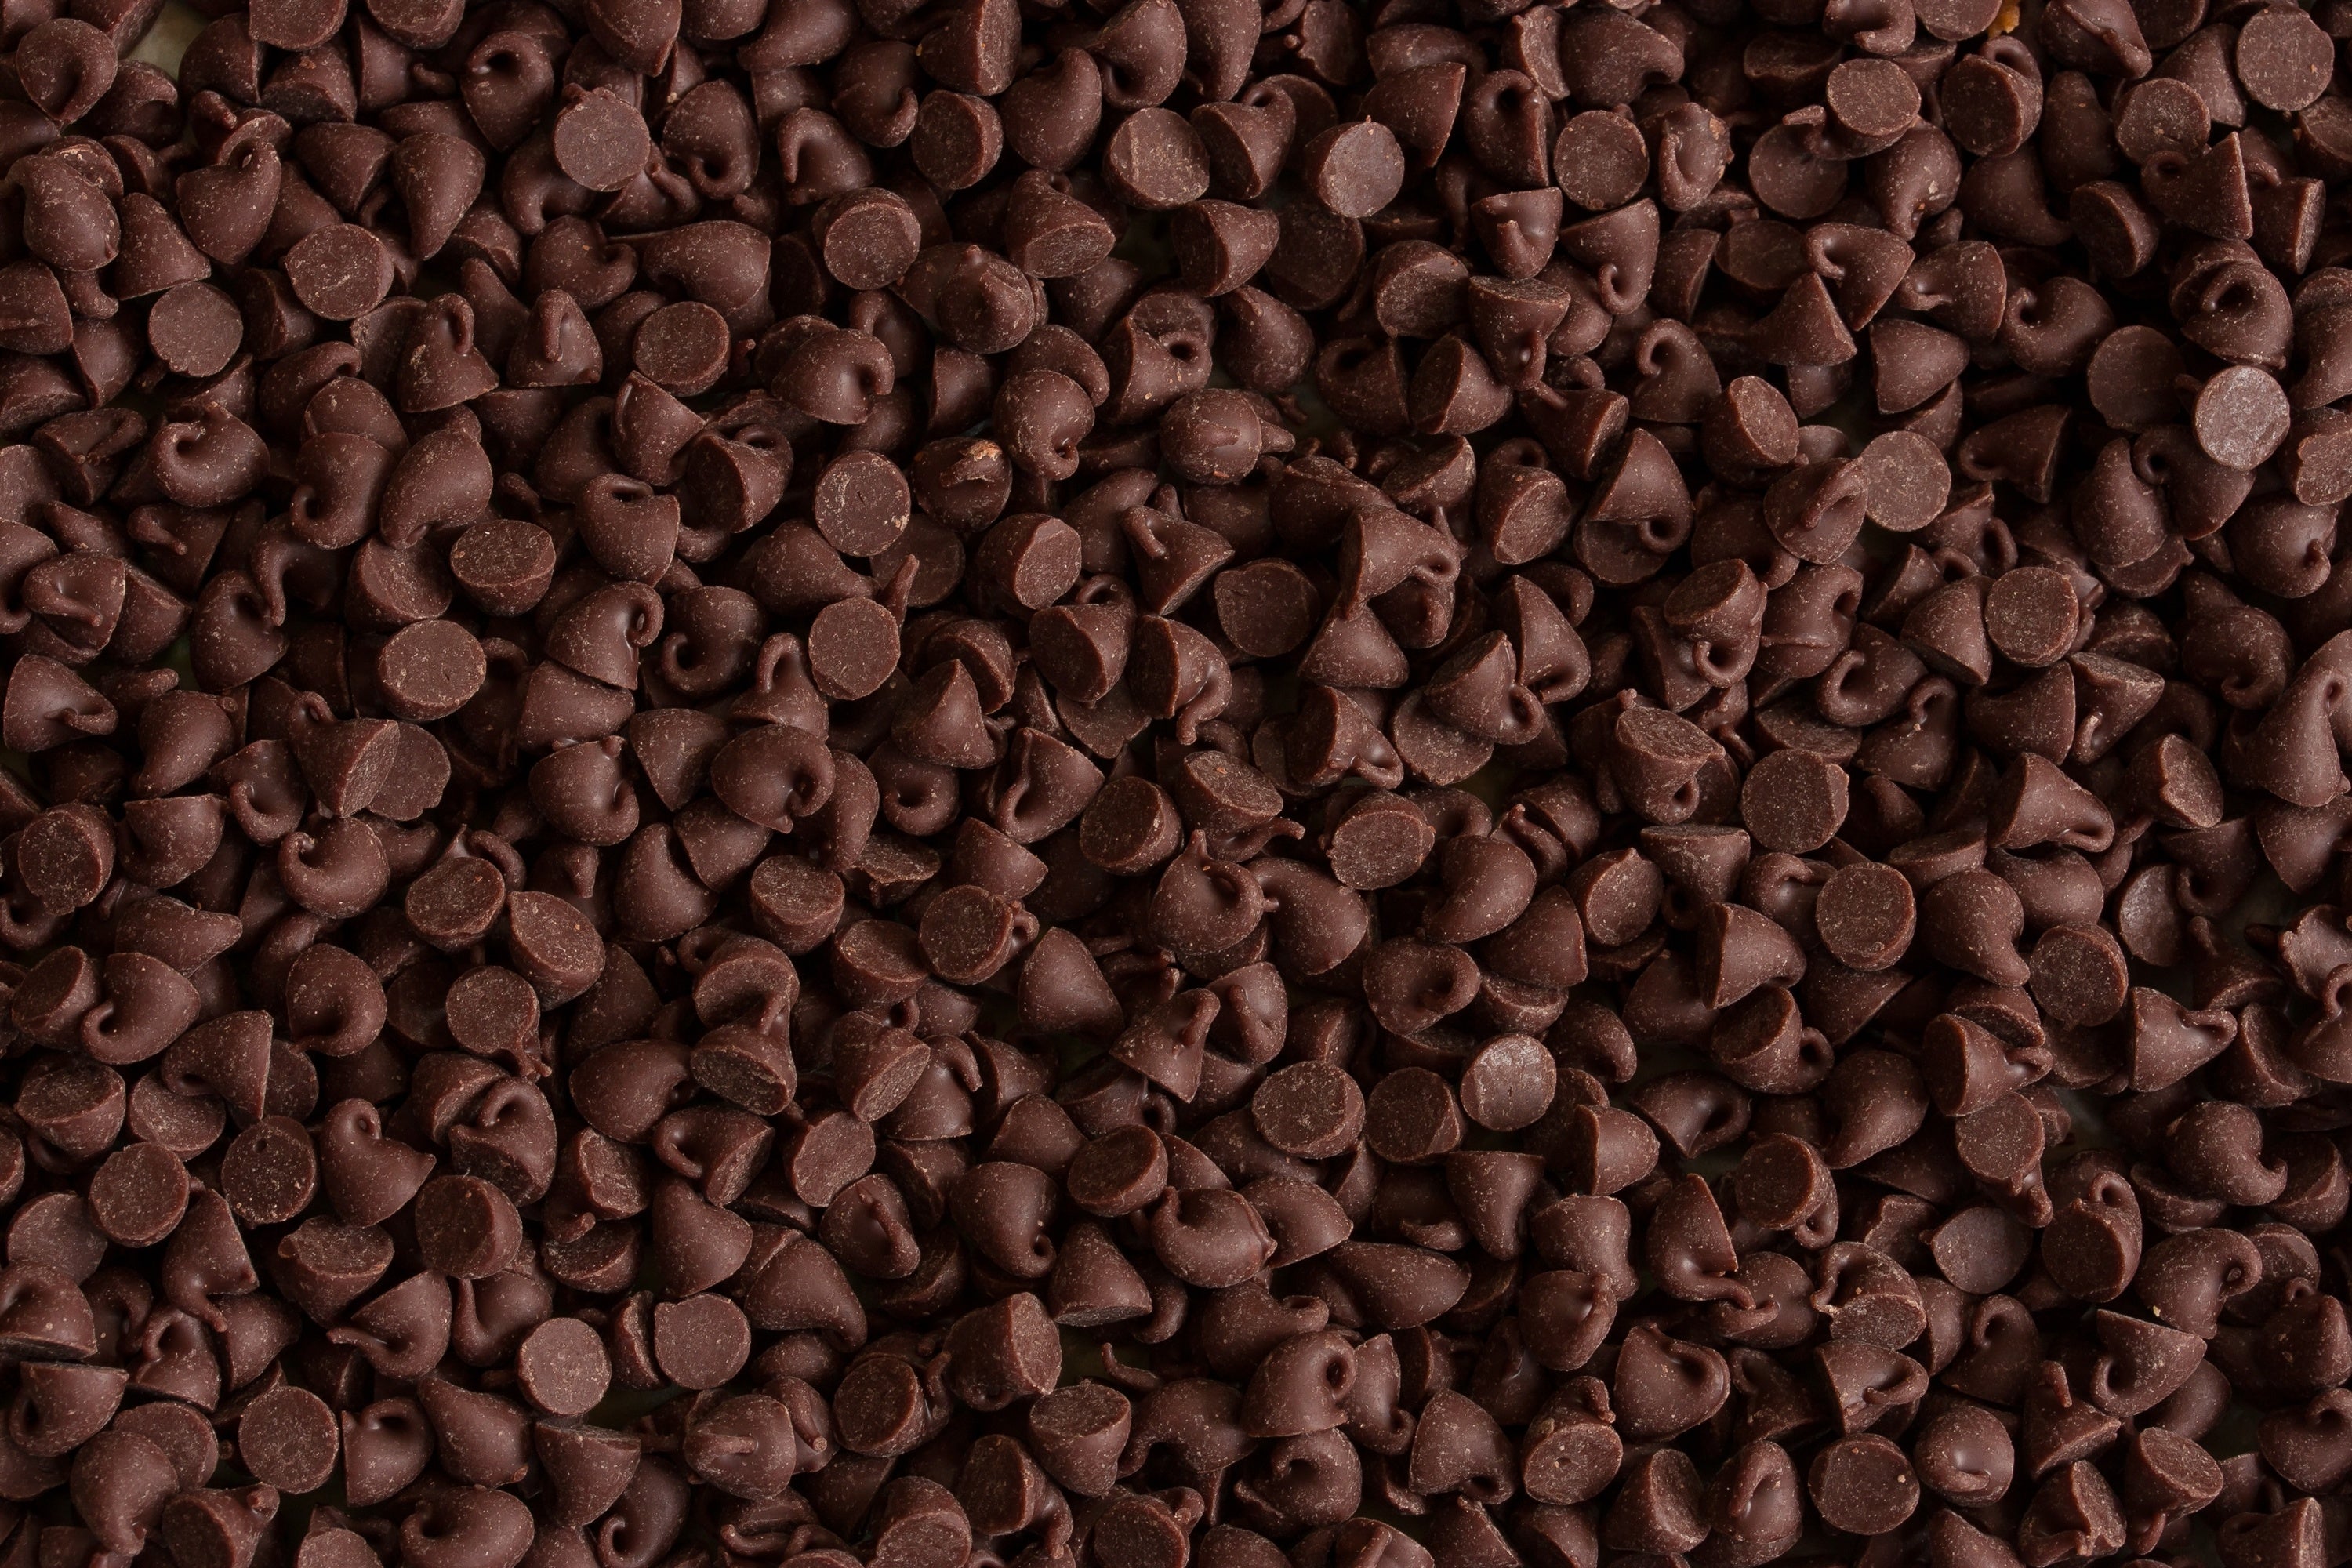 Semisweet Confectionery Chocolate Drops (11 lb) - 5 kg - Buy 1 Get 1 at 50% OFF